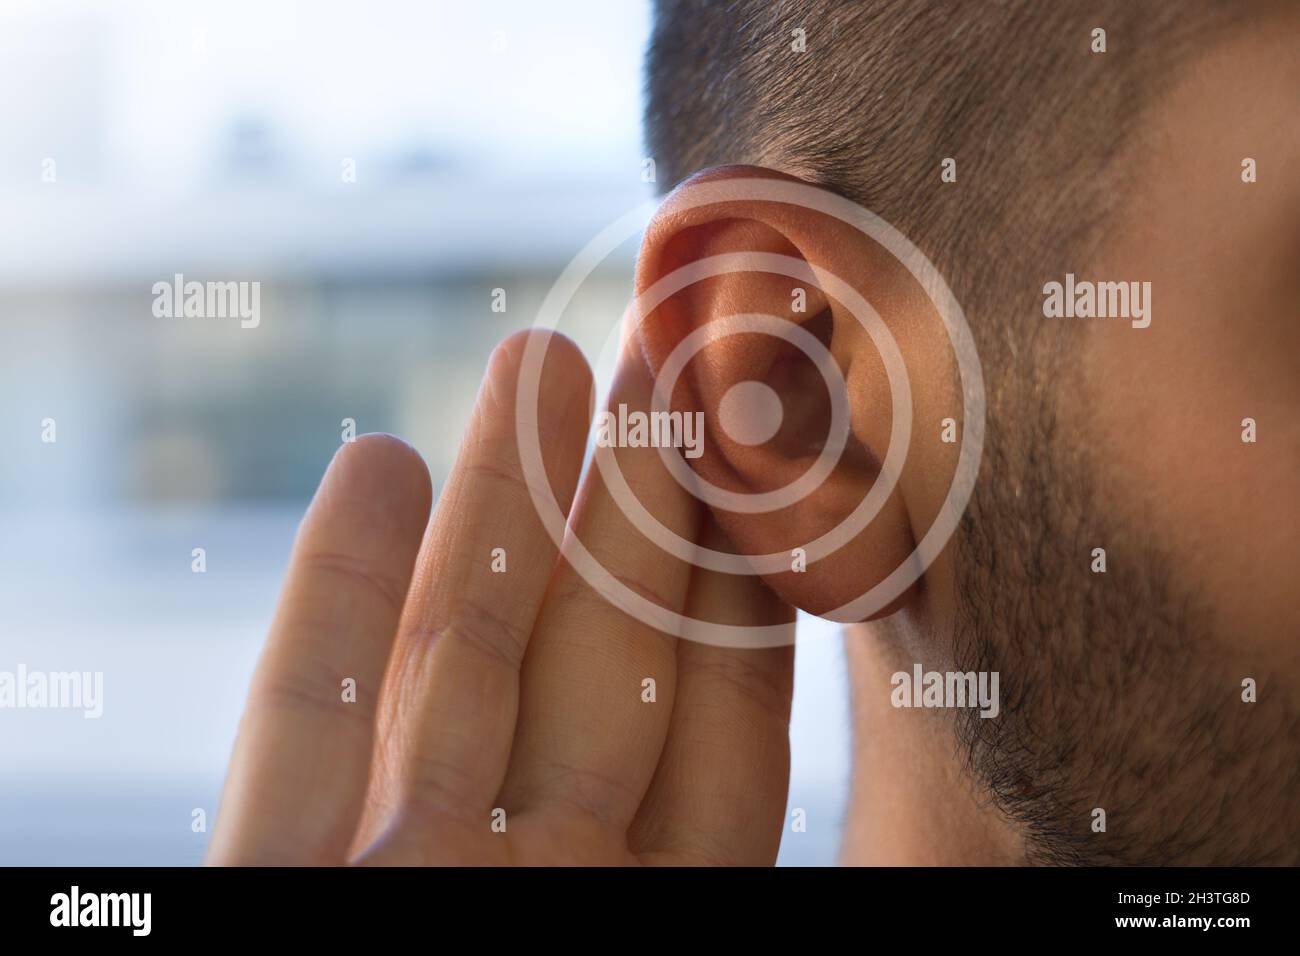 Tinnitus. Young man with hearing problems or hearing loss. Hearing test concept. Stock Photo